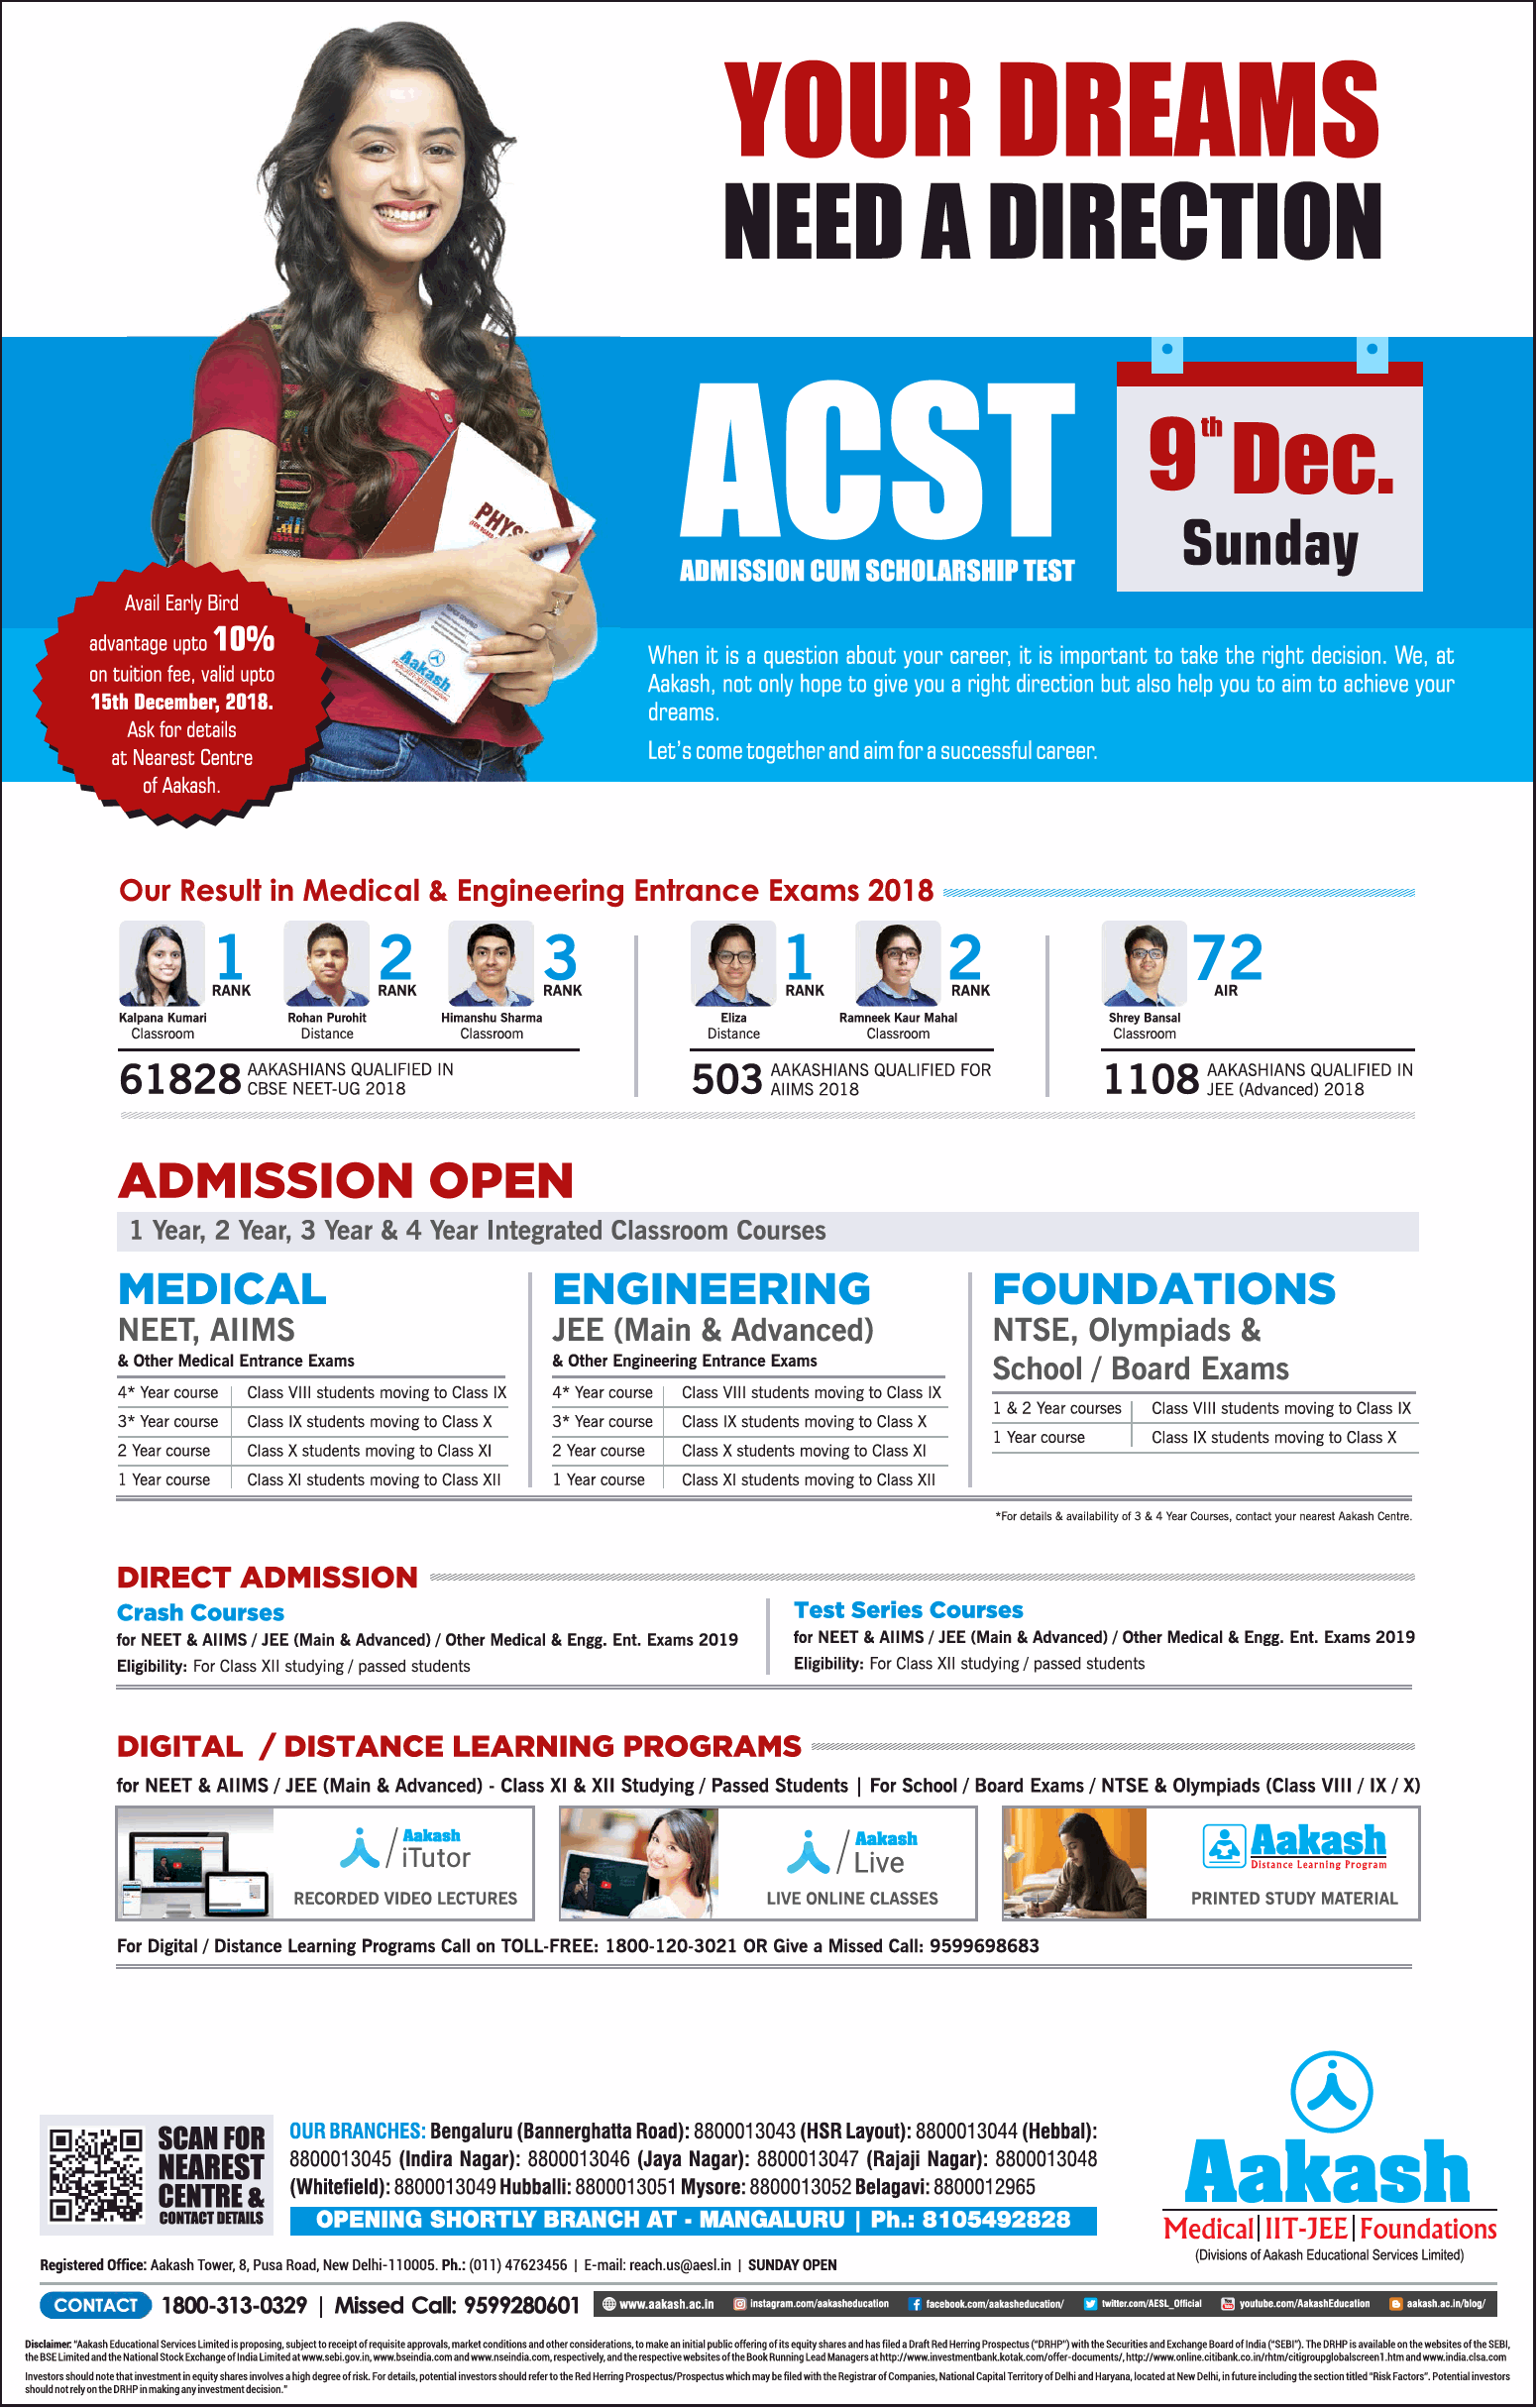 aakash-medical-iit-foundation-admissions-open-ad-times-of-india-bangalore-04-12-2018.png